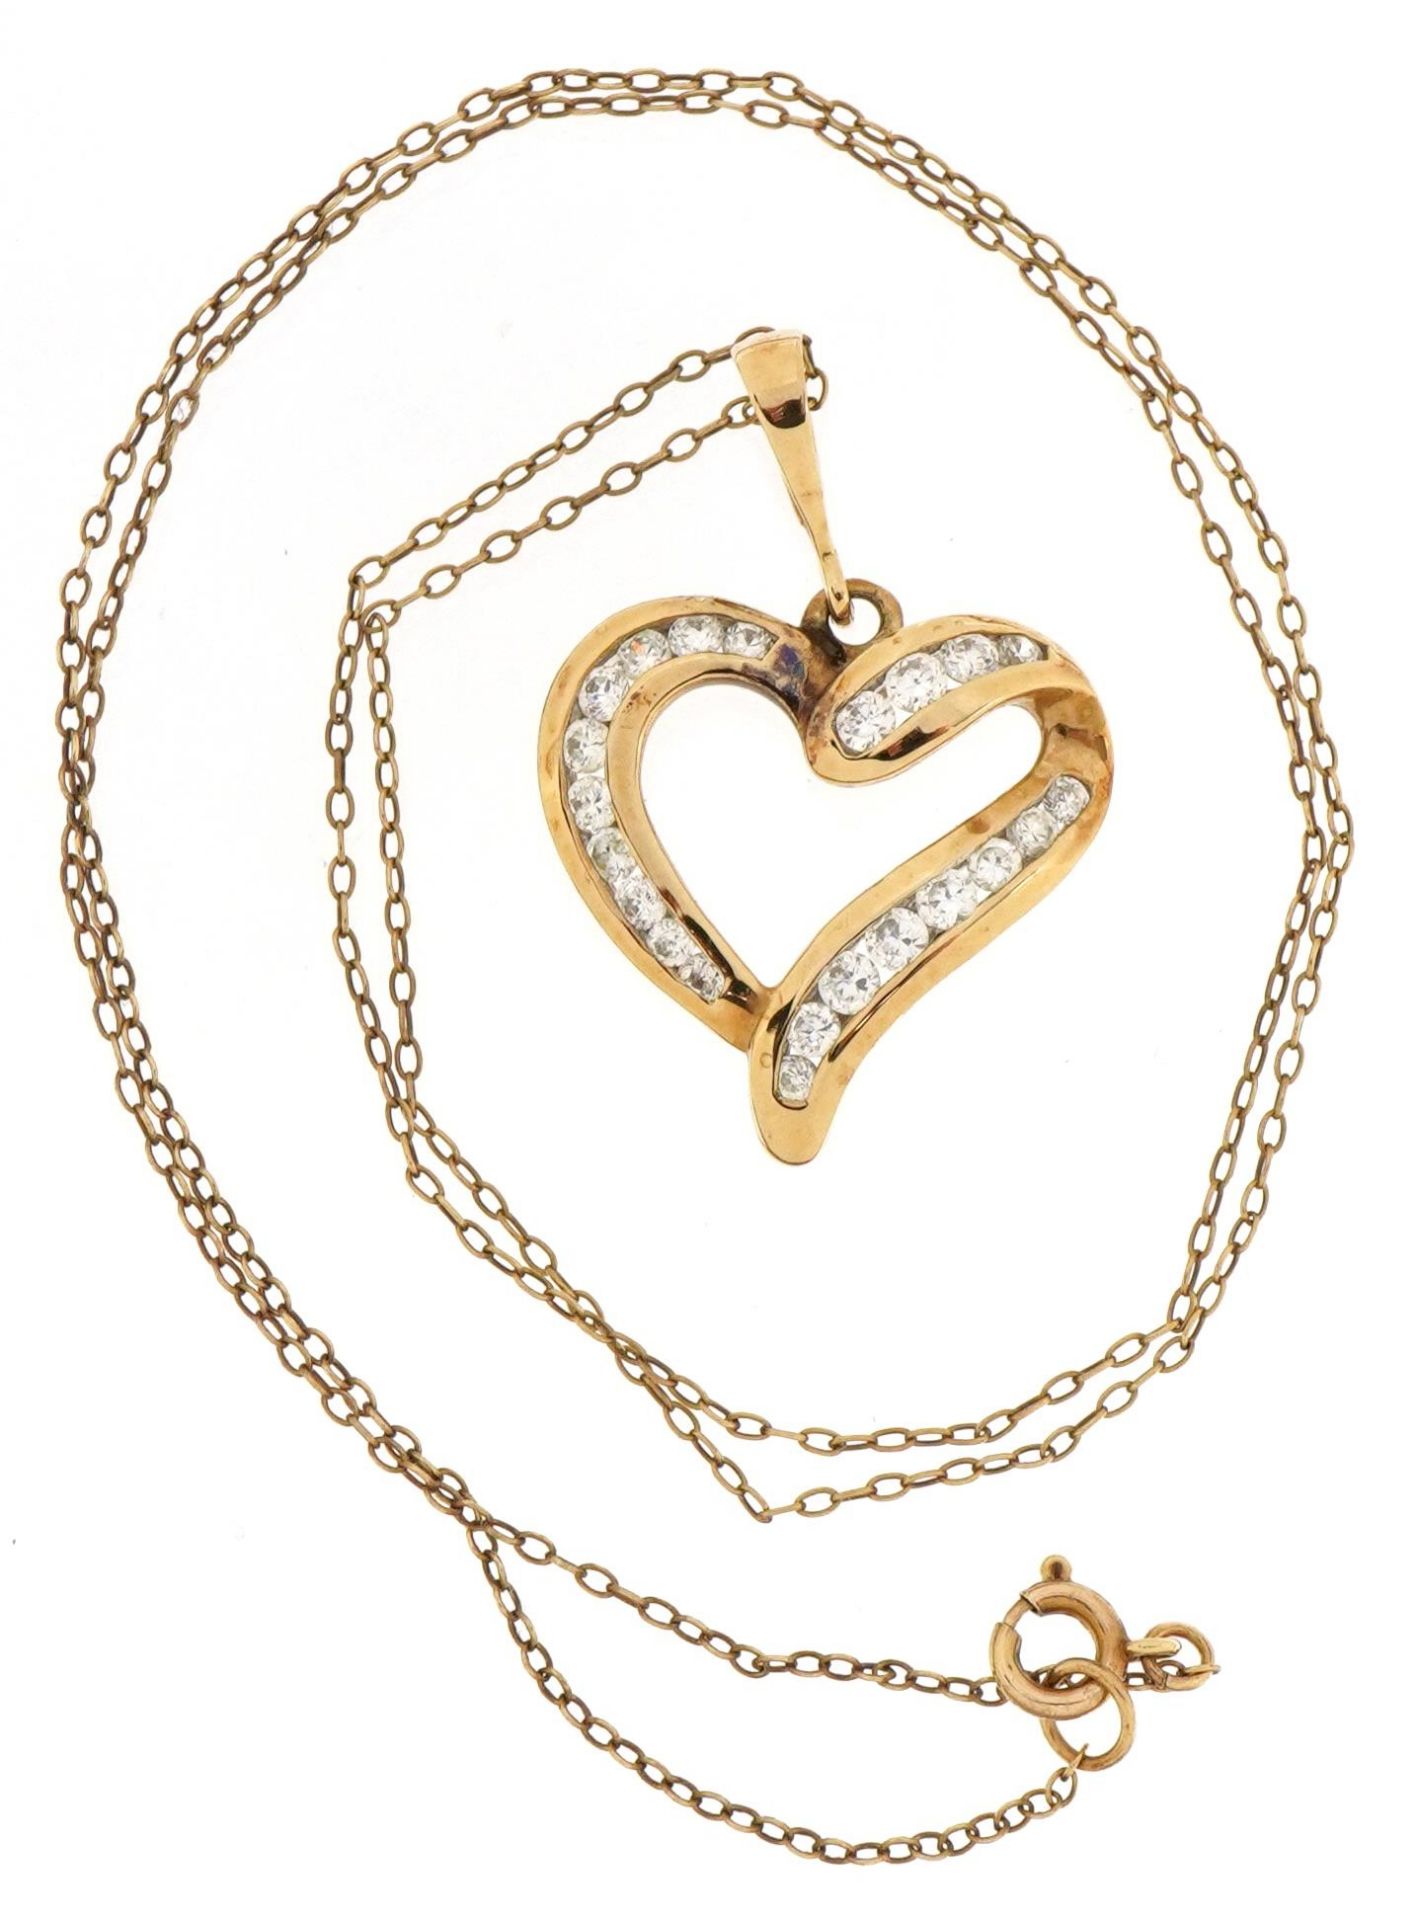 9ct gold clear stone love heart pendant on a 9ct gold Belcher link necklace, 3.2cm high and 48cm - Image 2 of 5